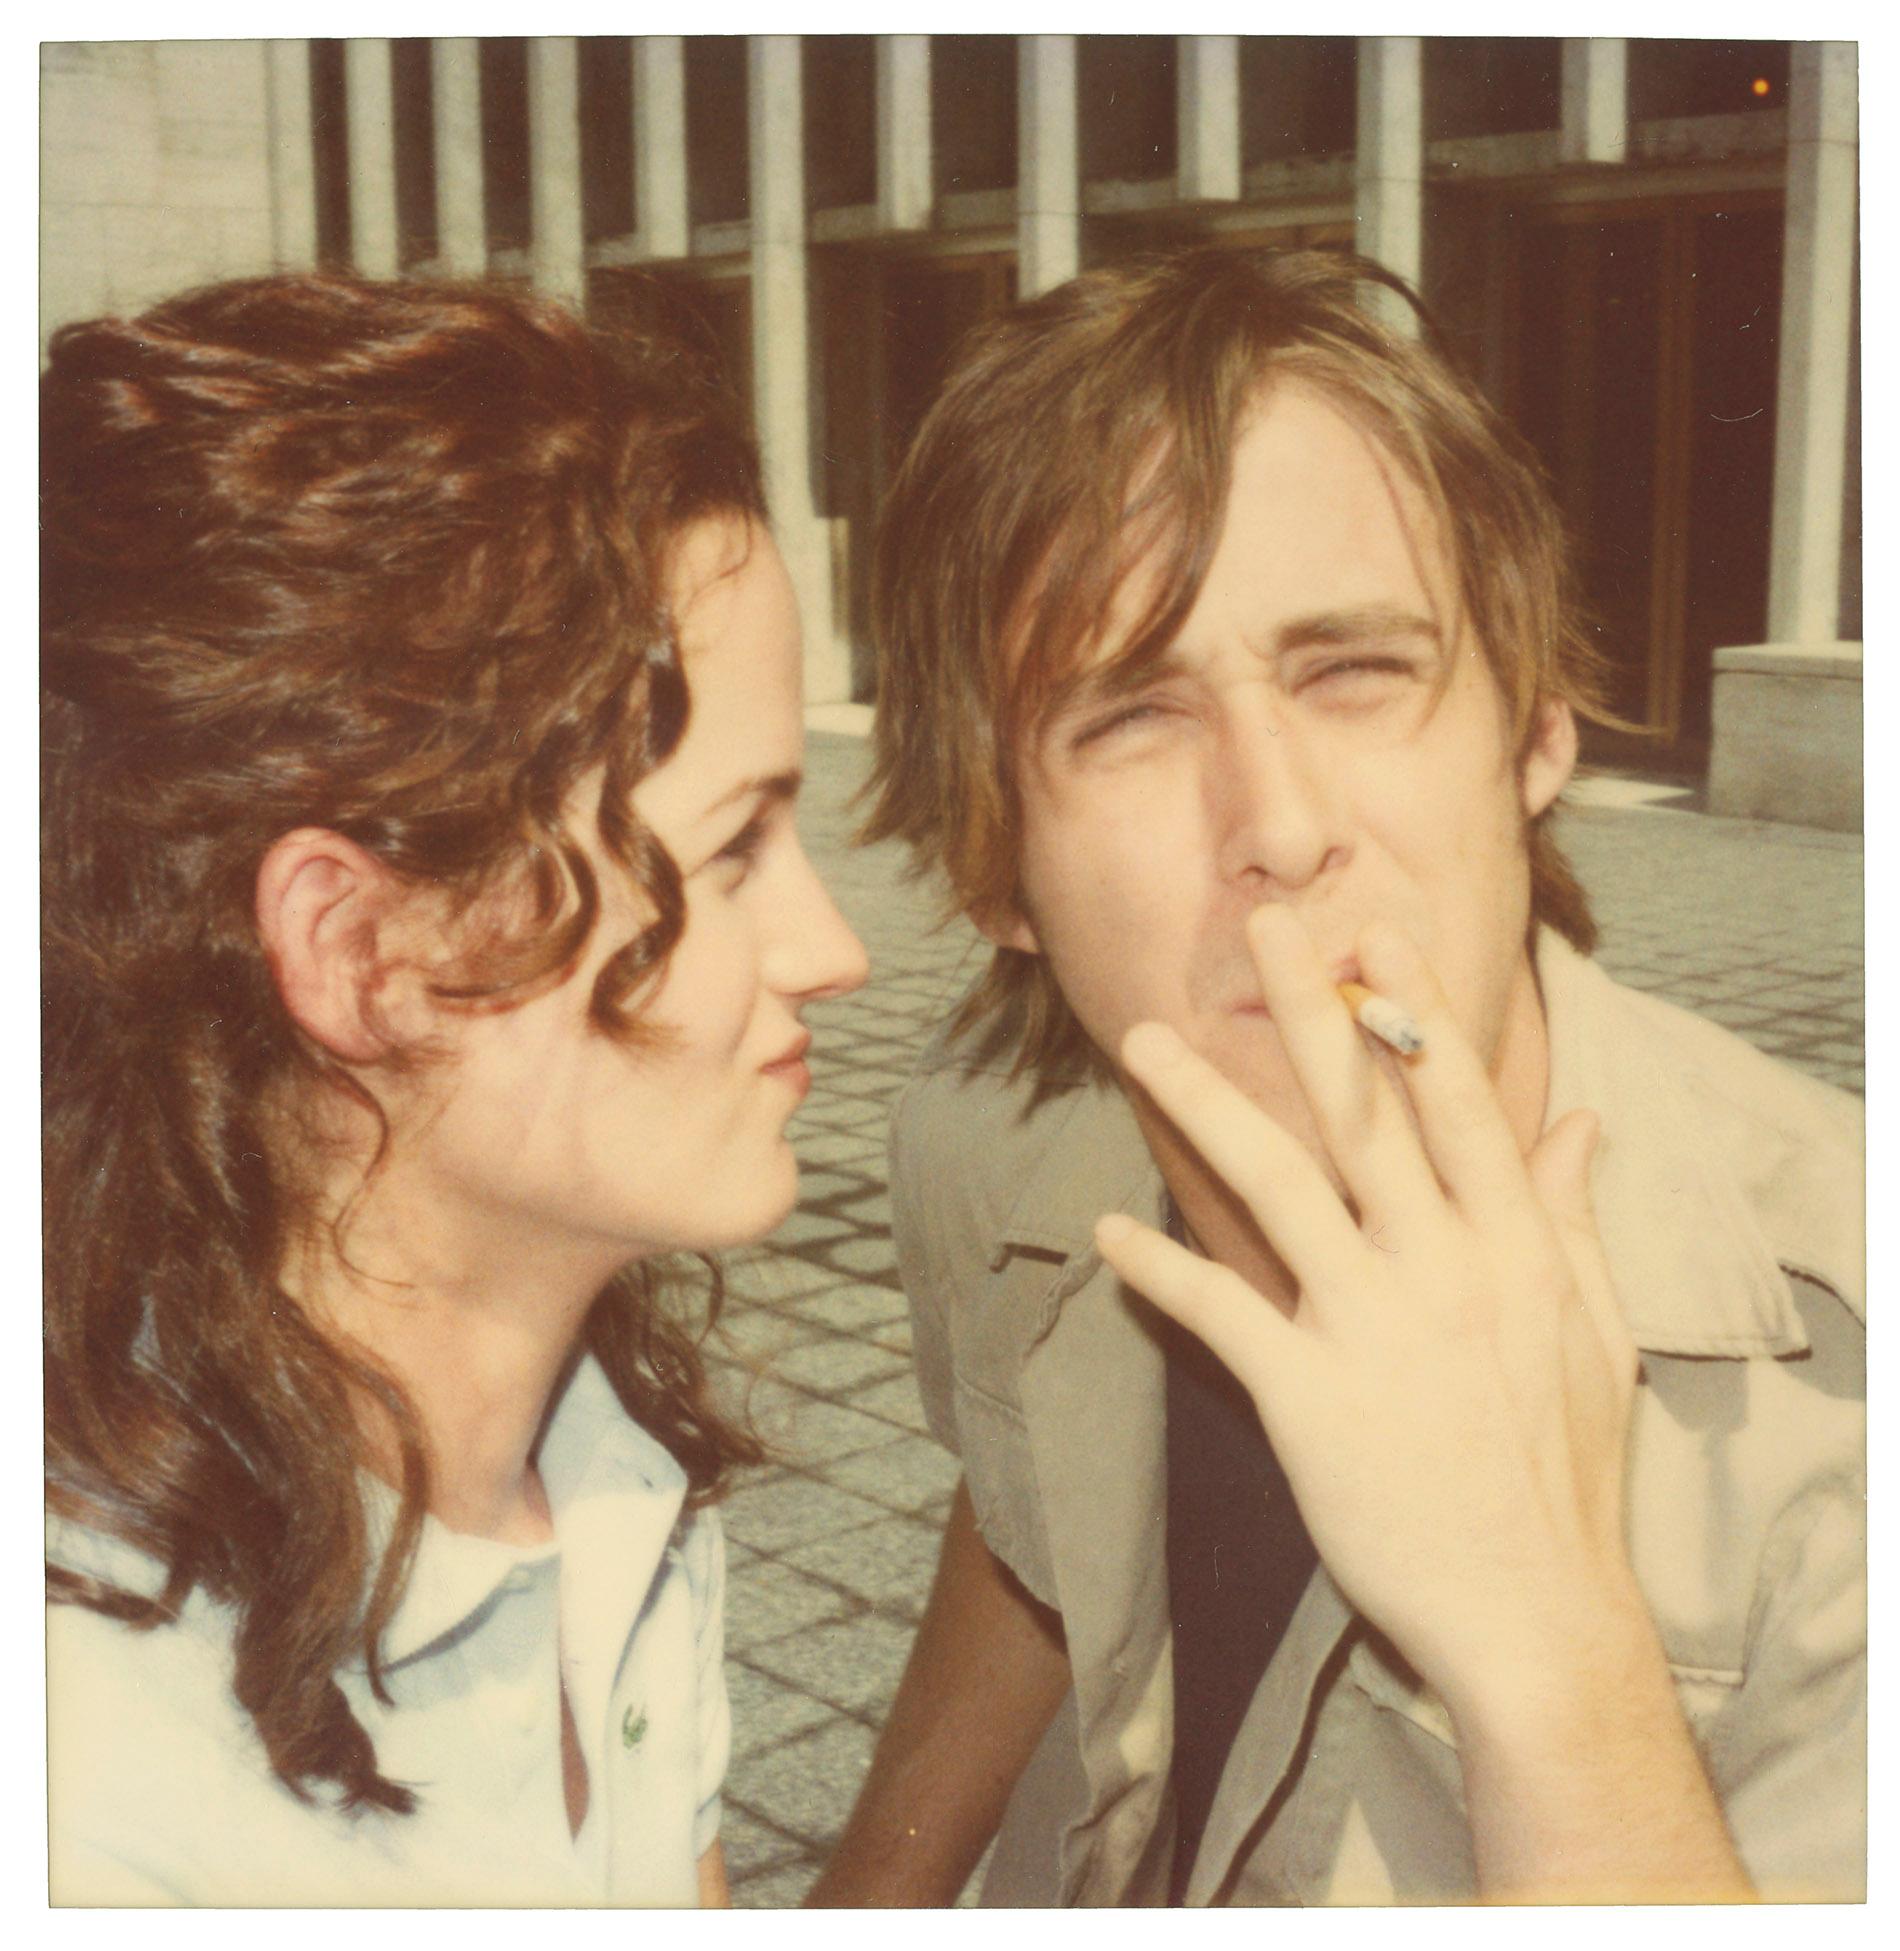 Athena and Henry (Stay) - featuring Ryan Gosling and Elizabeth Reaser - Polaroid